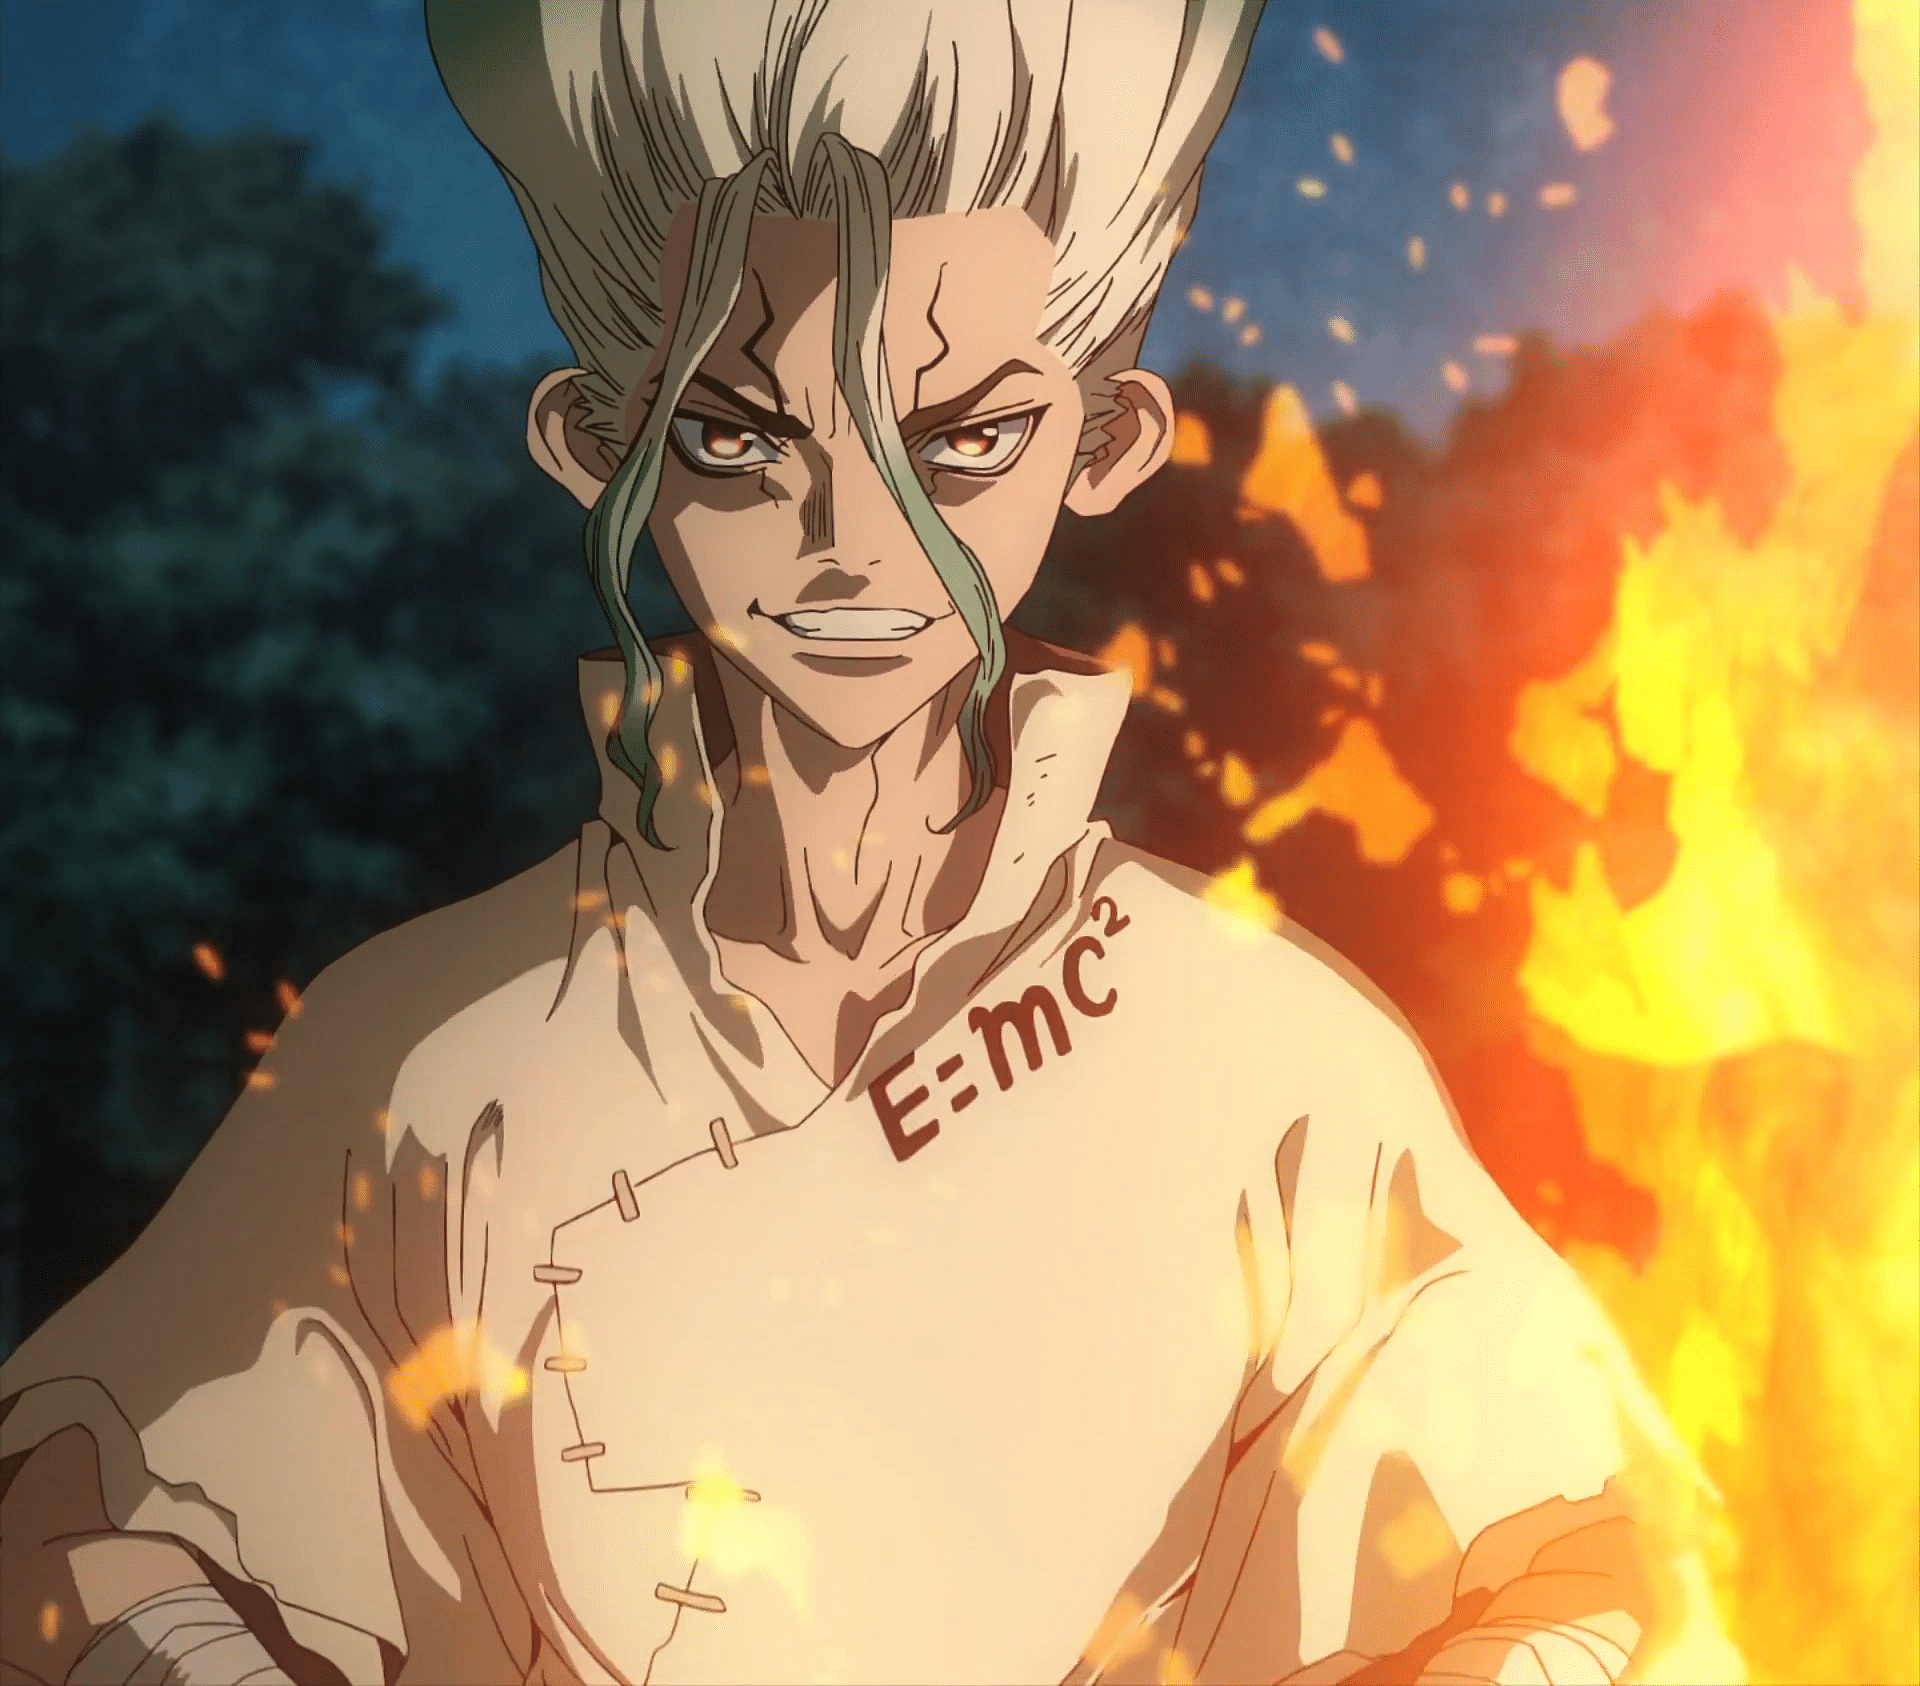 Dr. STONE New World Releases New Main Visual with Senku